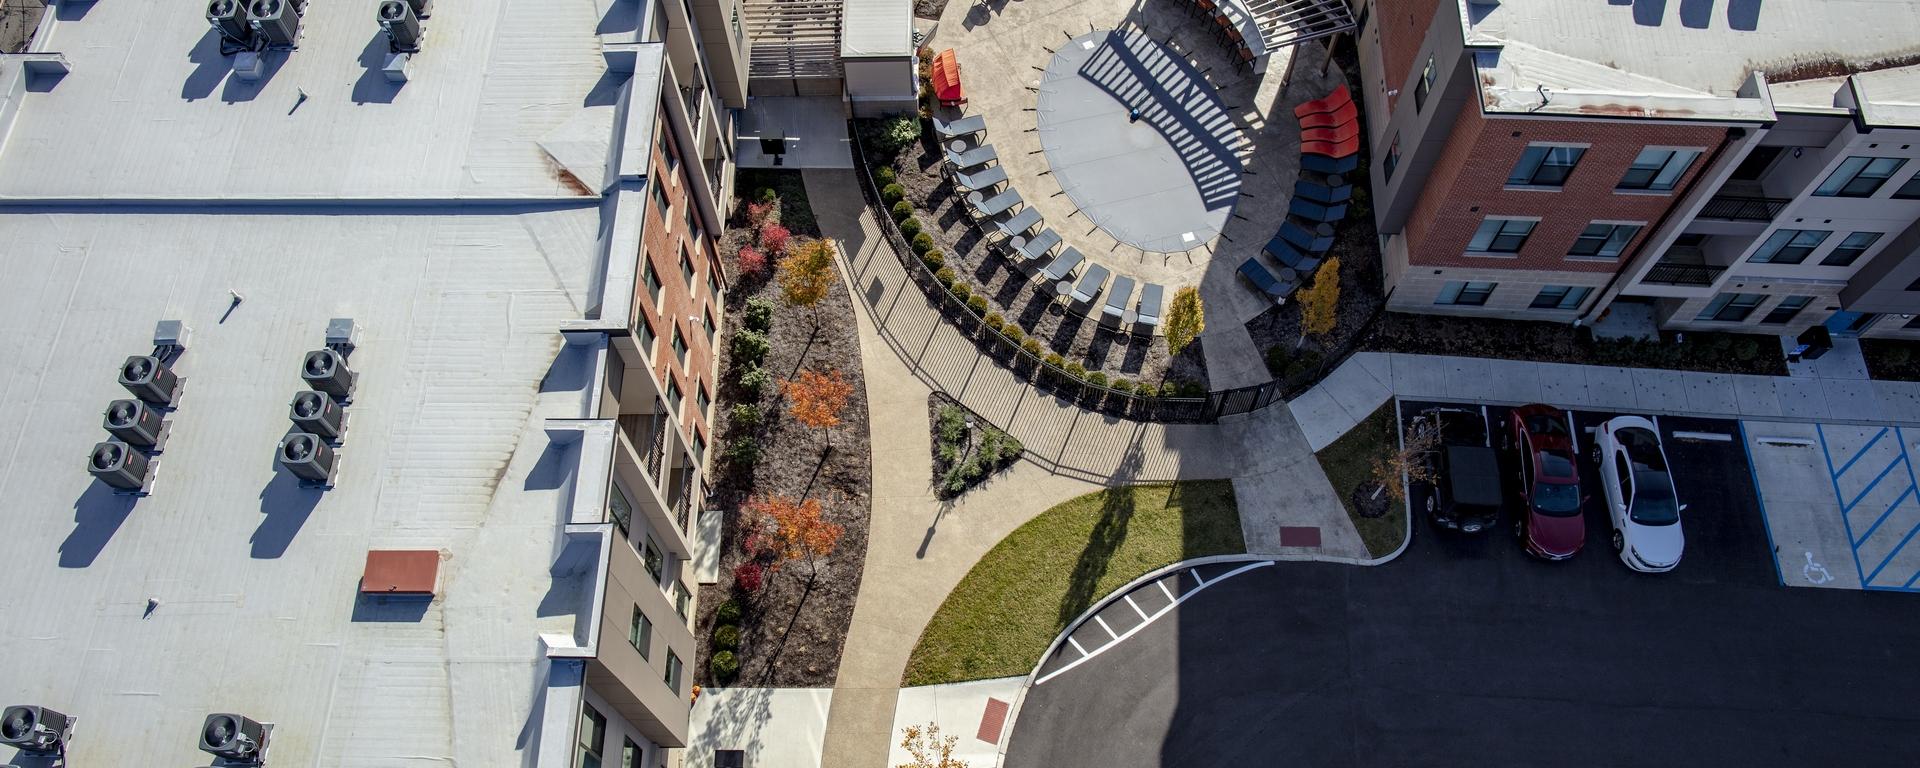 aerial of courtyard inside apartment complex